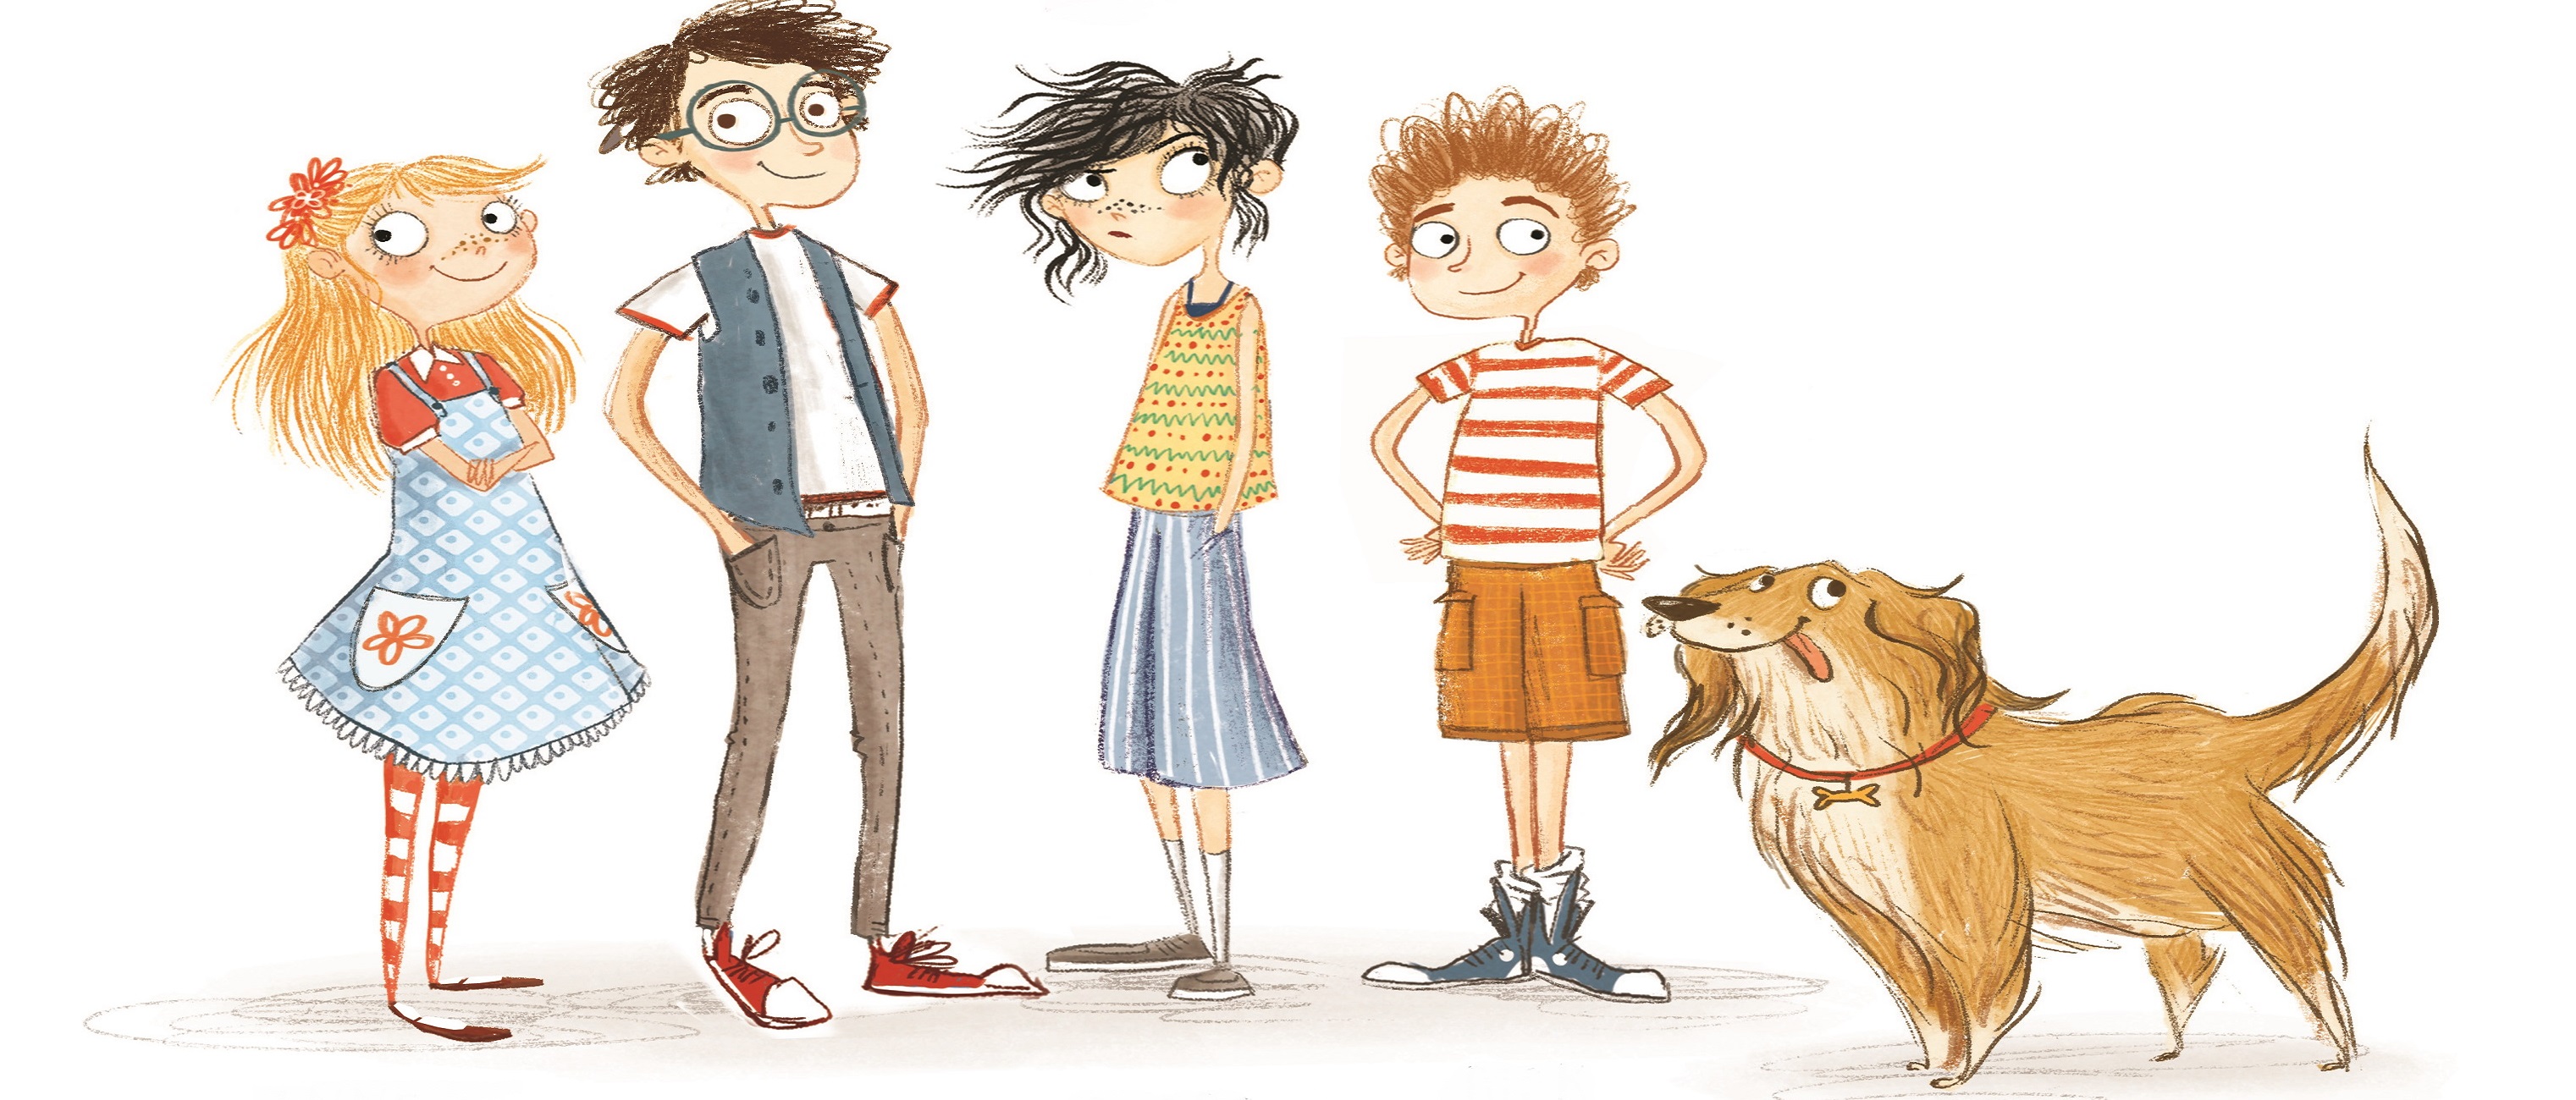 The Famous Five go digital for 75th anniversary writing competition